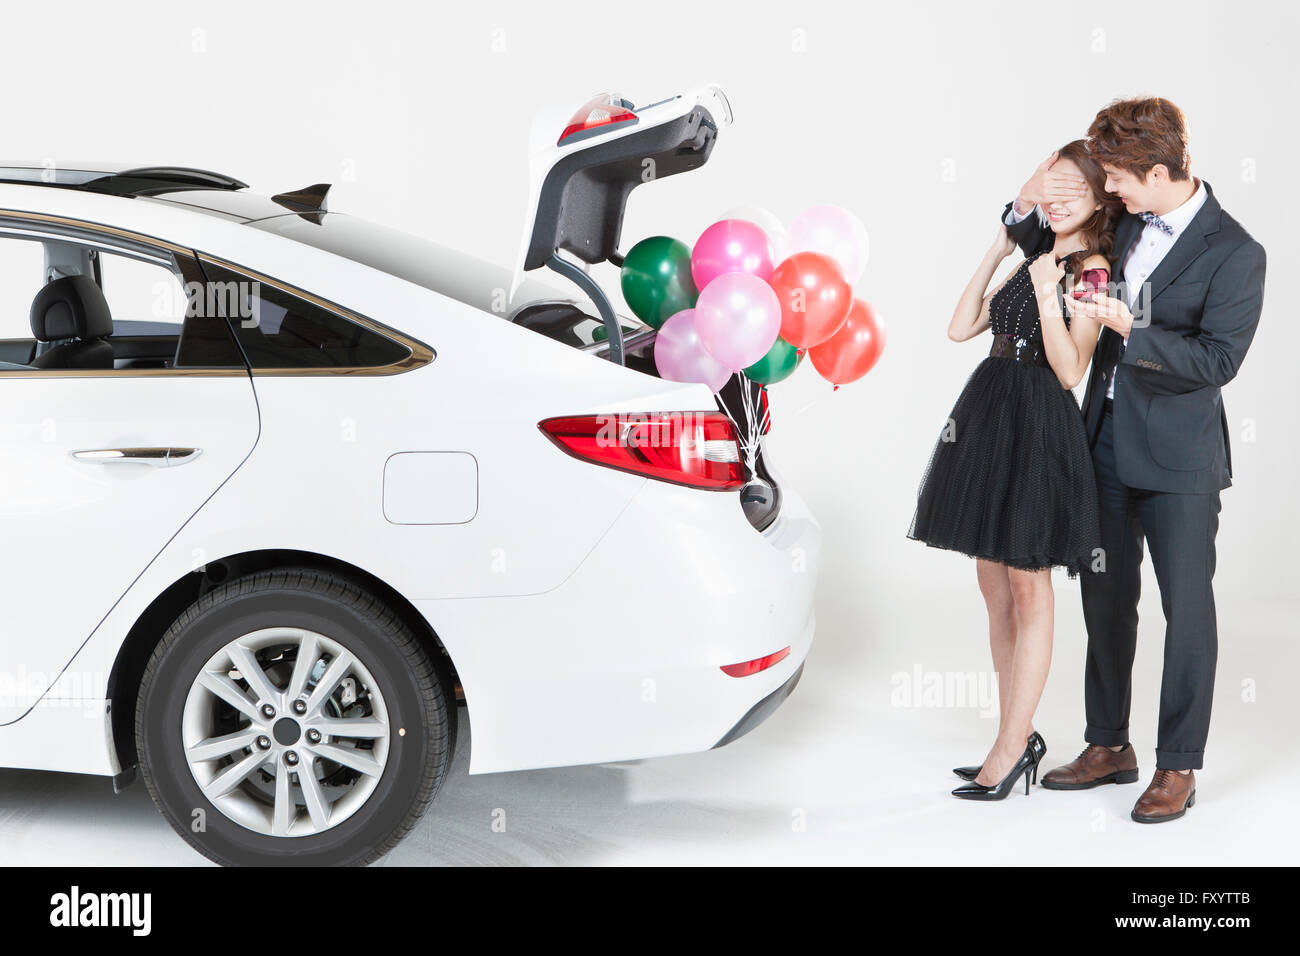 Young smiling man in suit holding a present box covering young woman's eyes in dress behind a car with balloons Stock Photo